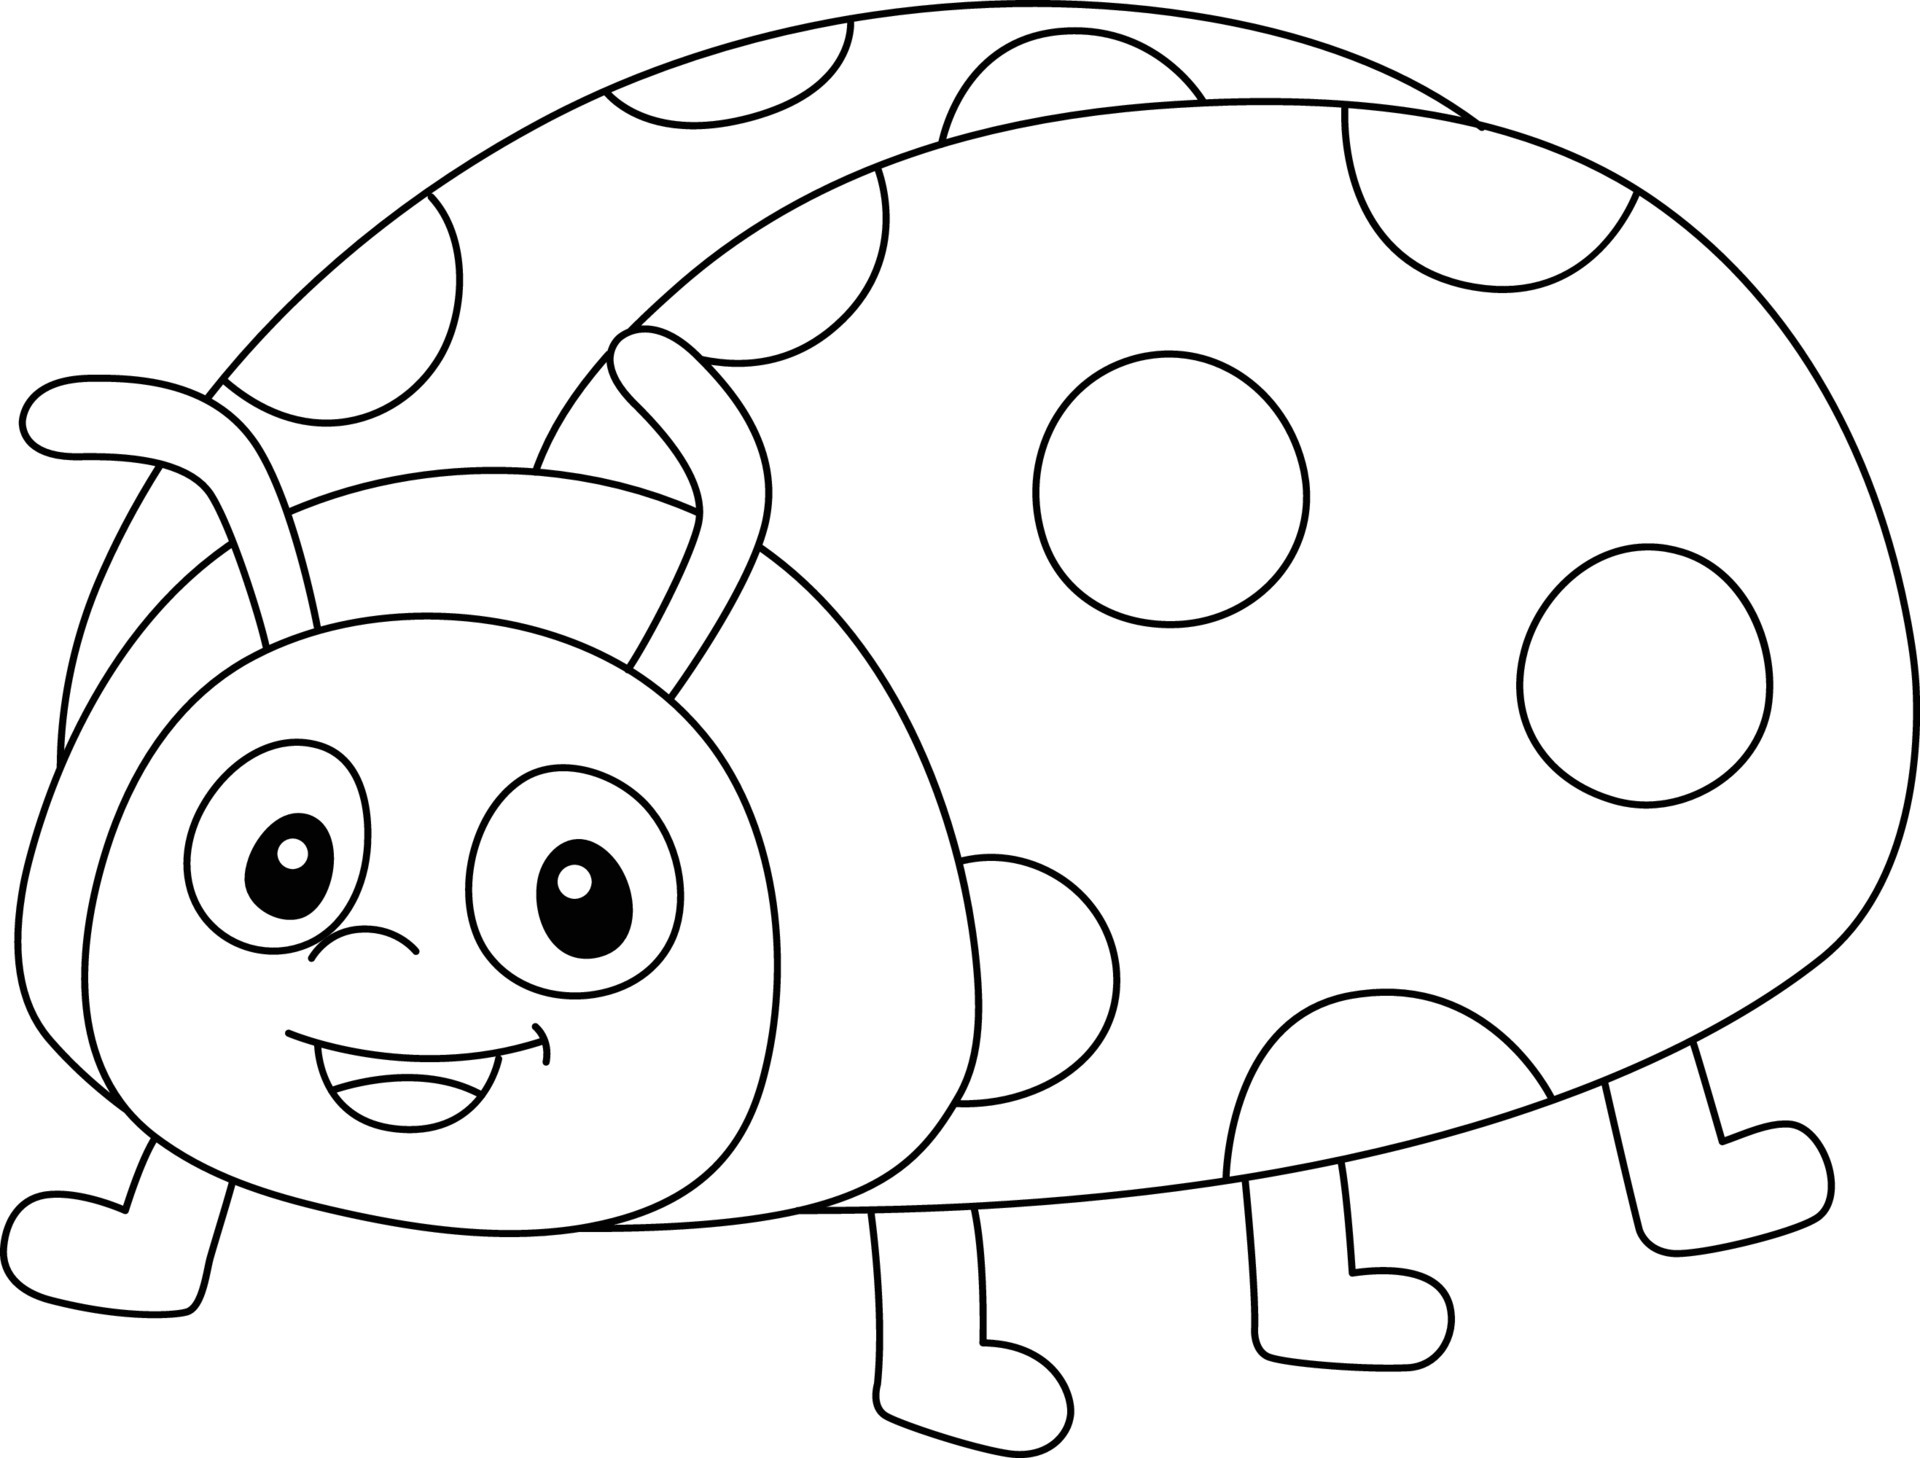 Ladybug Coloring Page Isolated for Kids 20 Vector Art at Vecteezy